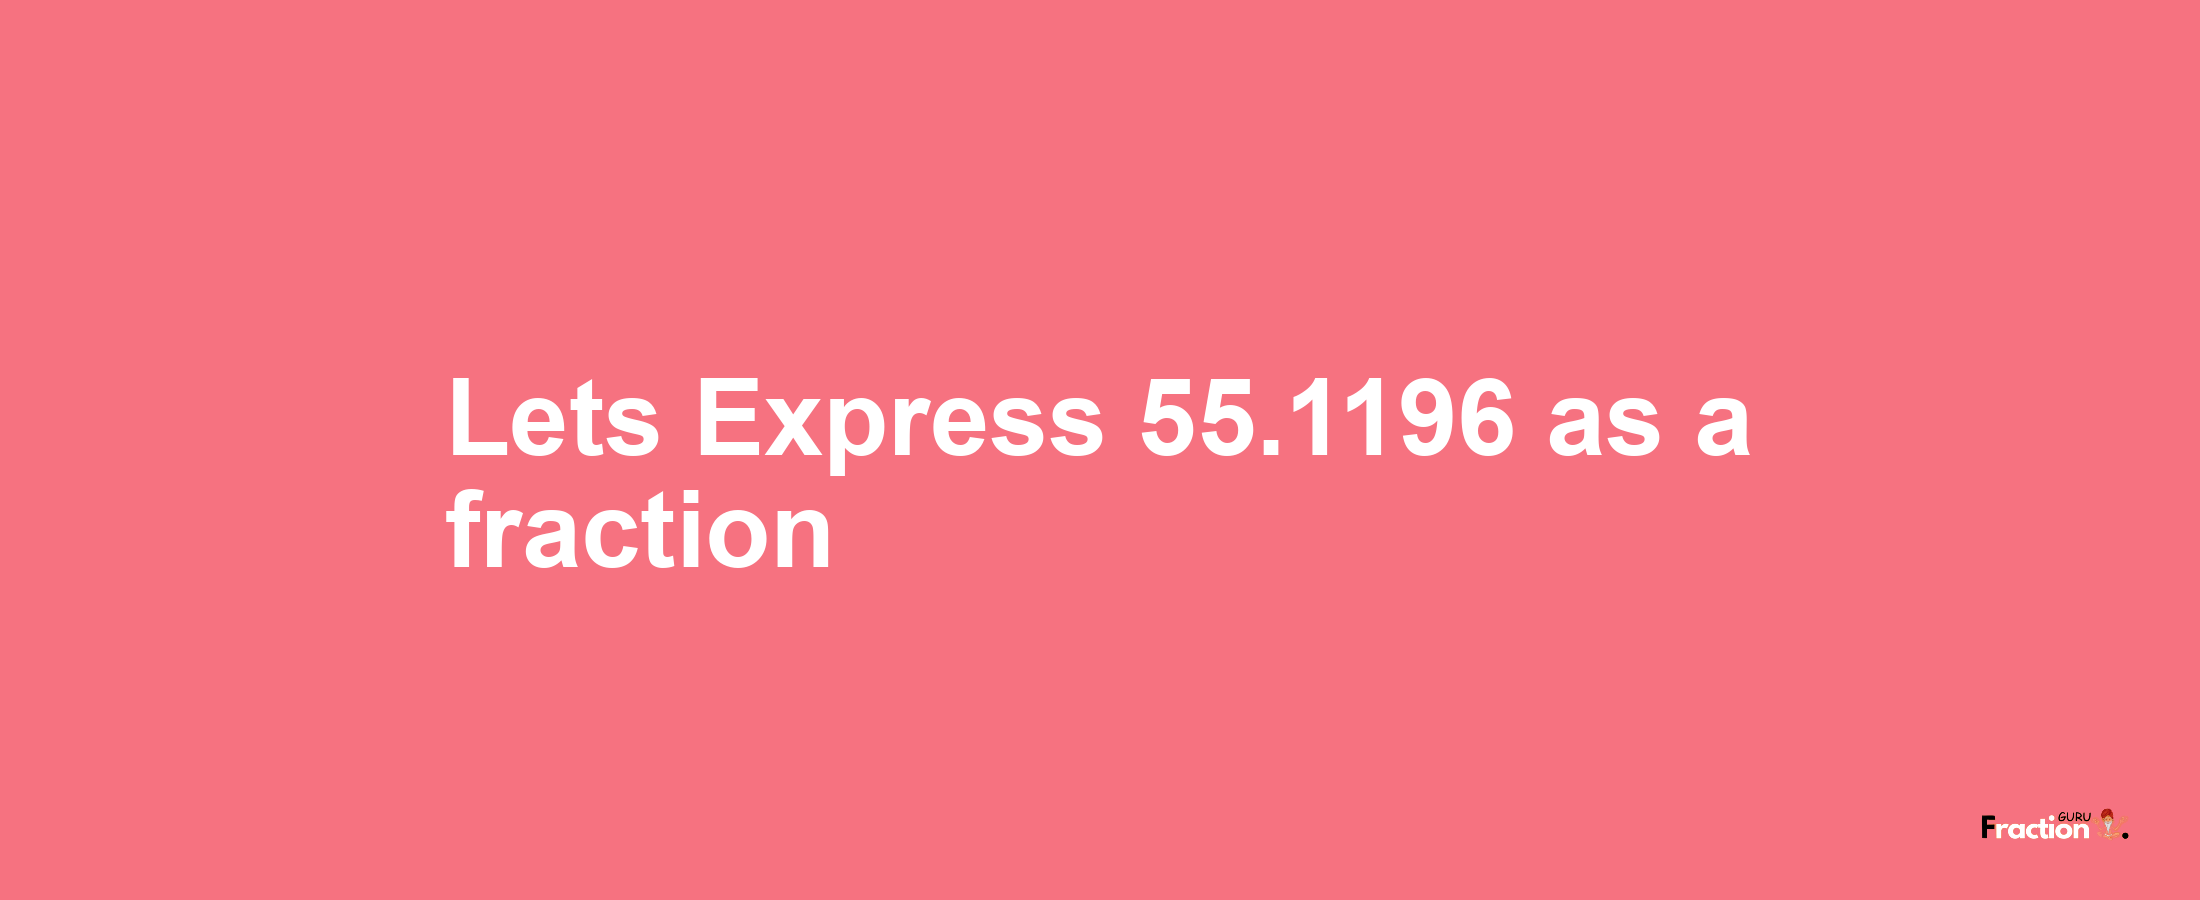 Lets Express 55.1196 as afraction